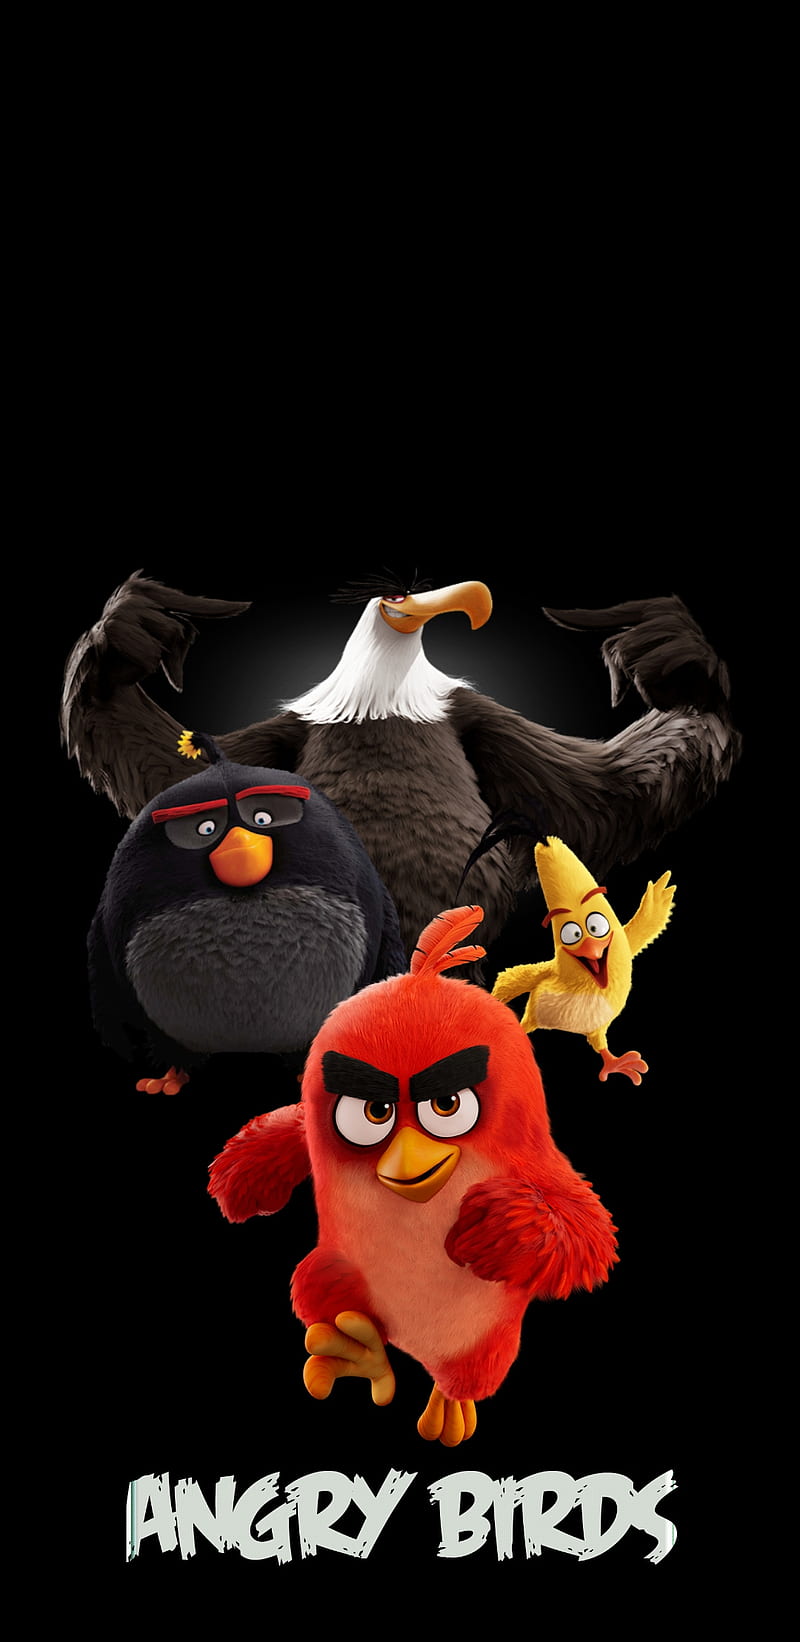 The Angry Birds Movie 2 Poster UHD 4K Wallpaper | Pixelz